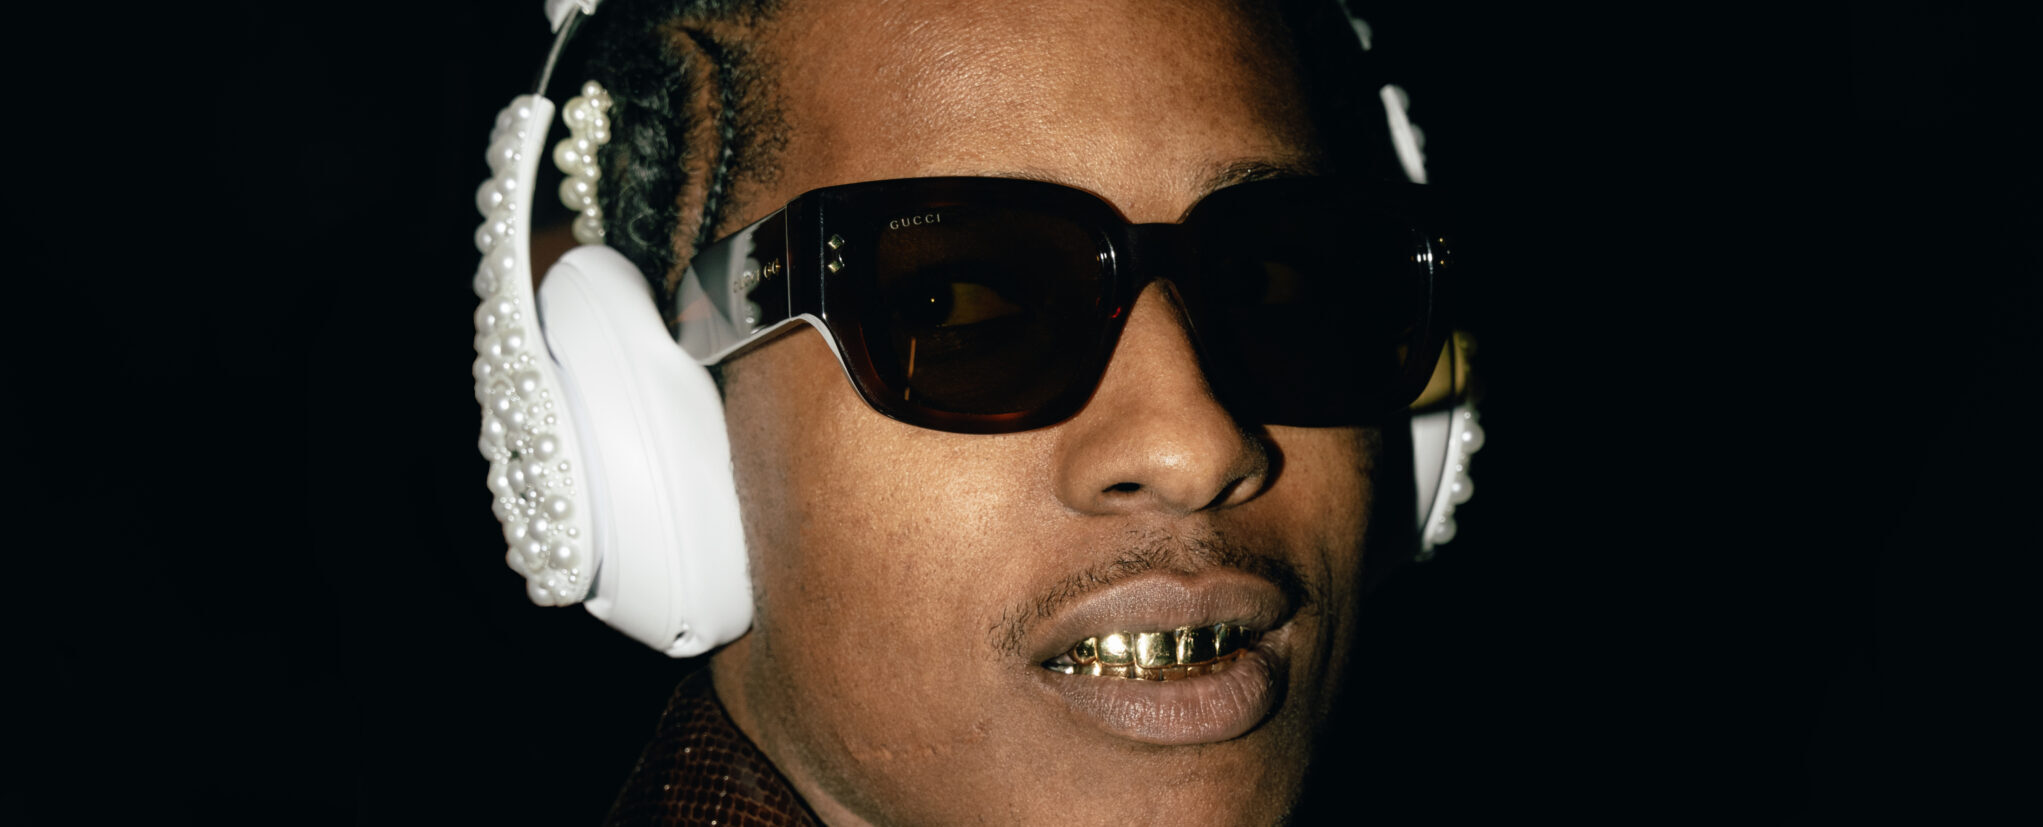 A$AP ROCKY wearing ornate Gucci sunglasses, embellished headphones, and a textured jacket with a snake skin pattern posing for a photograph.